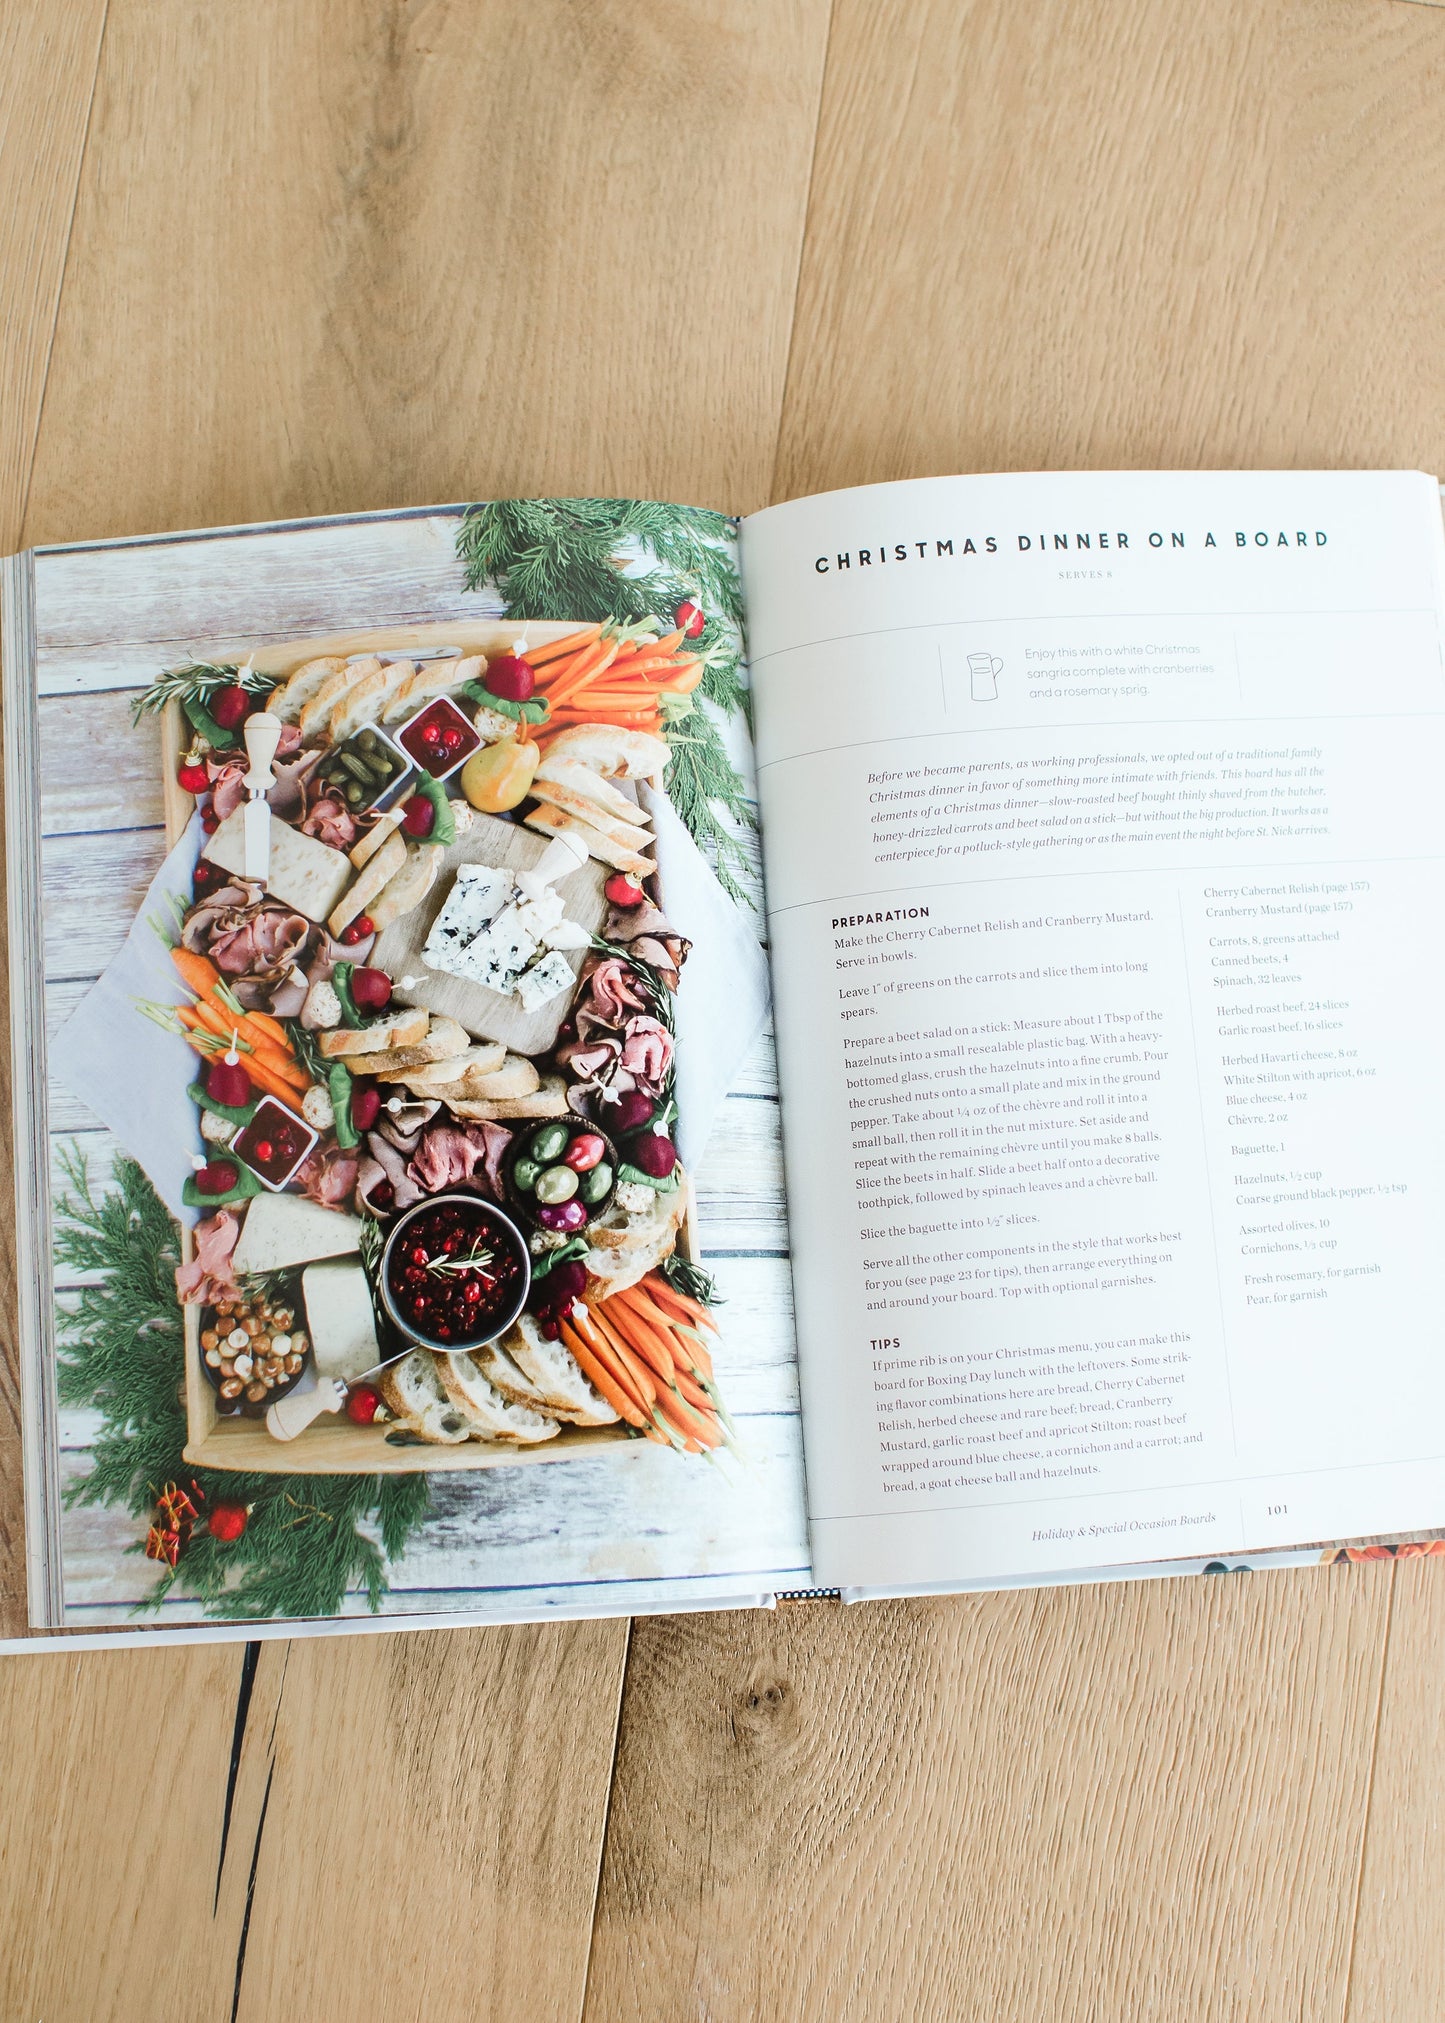 On Boards recipe and styling guide